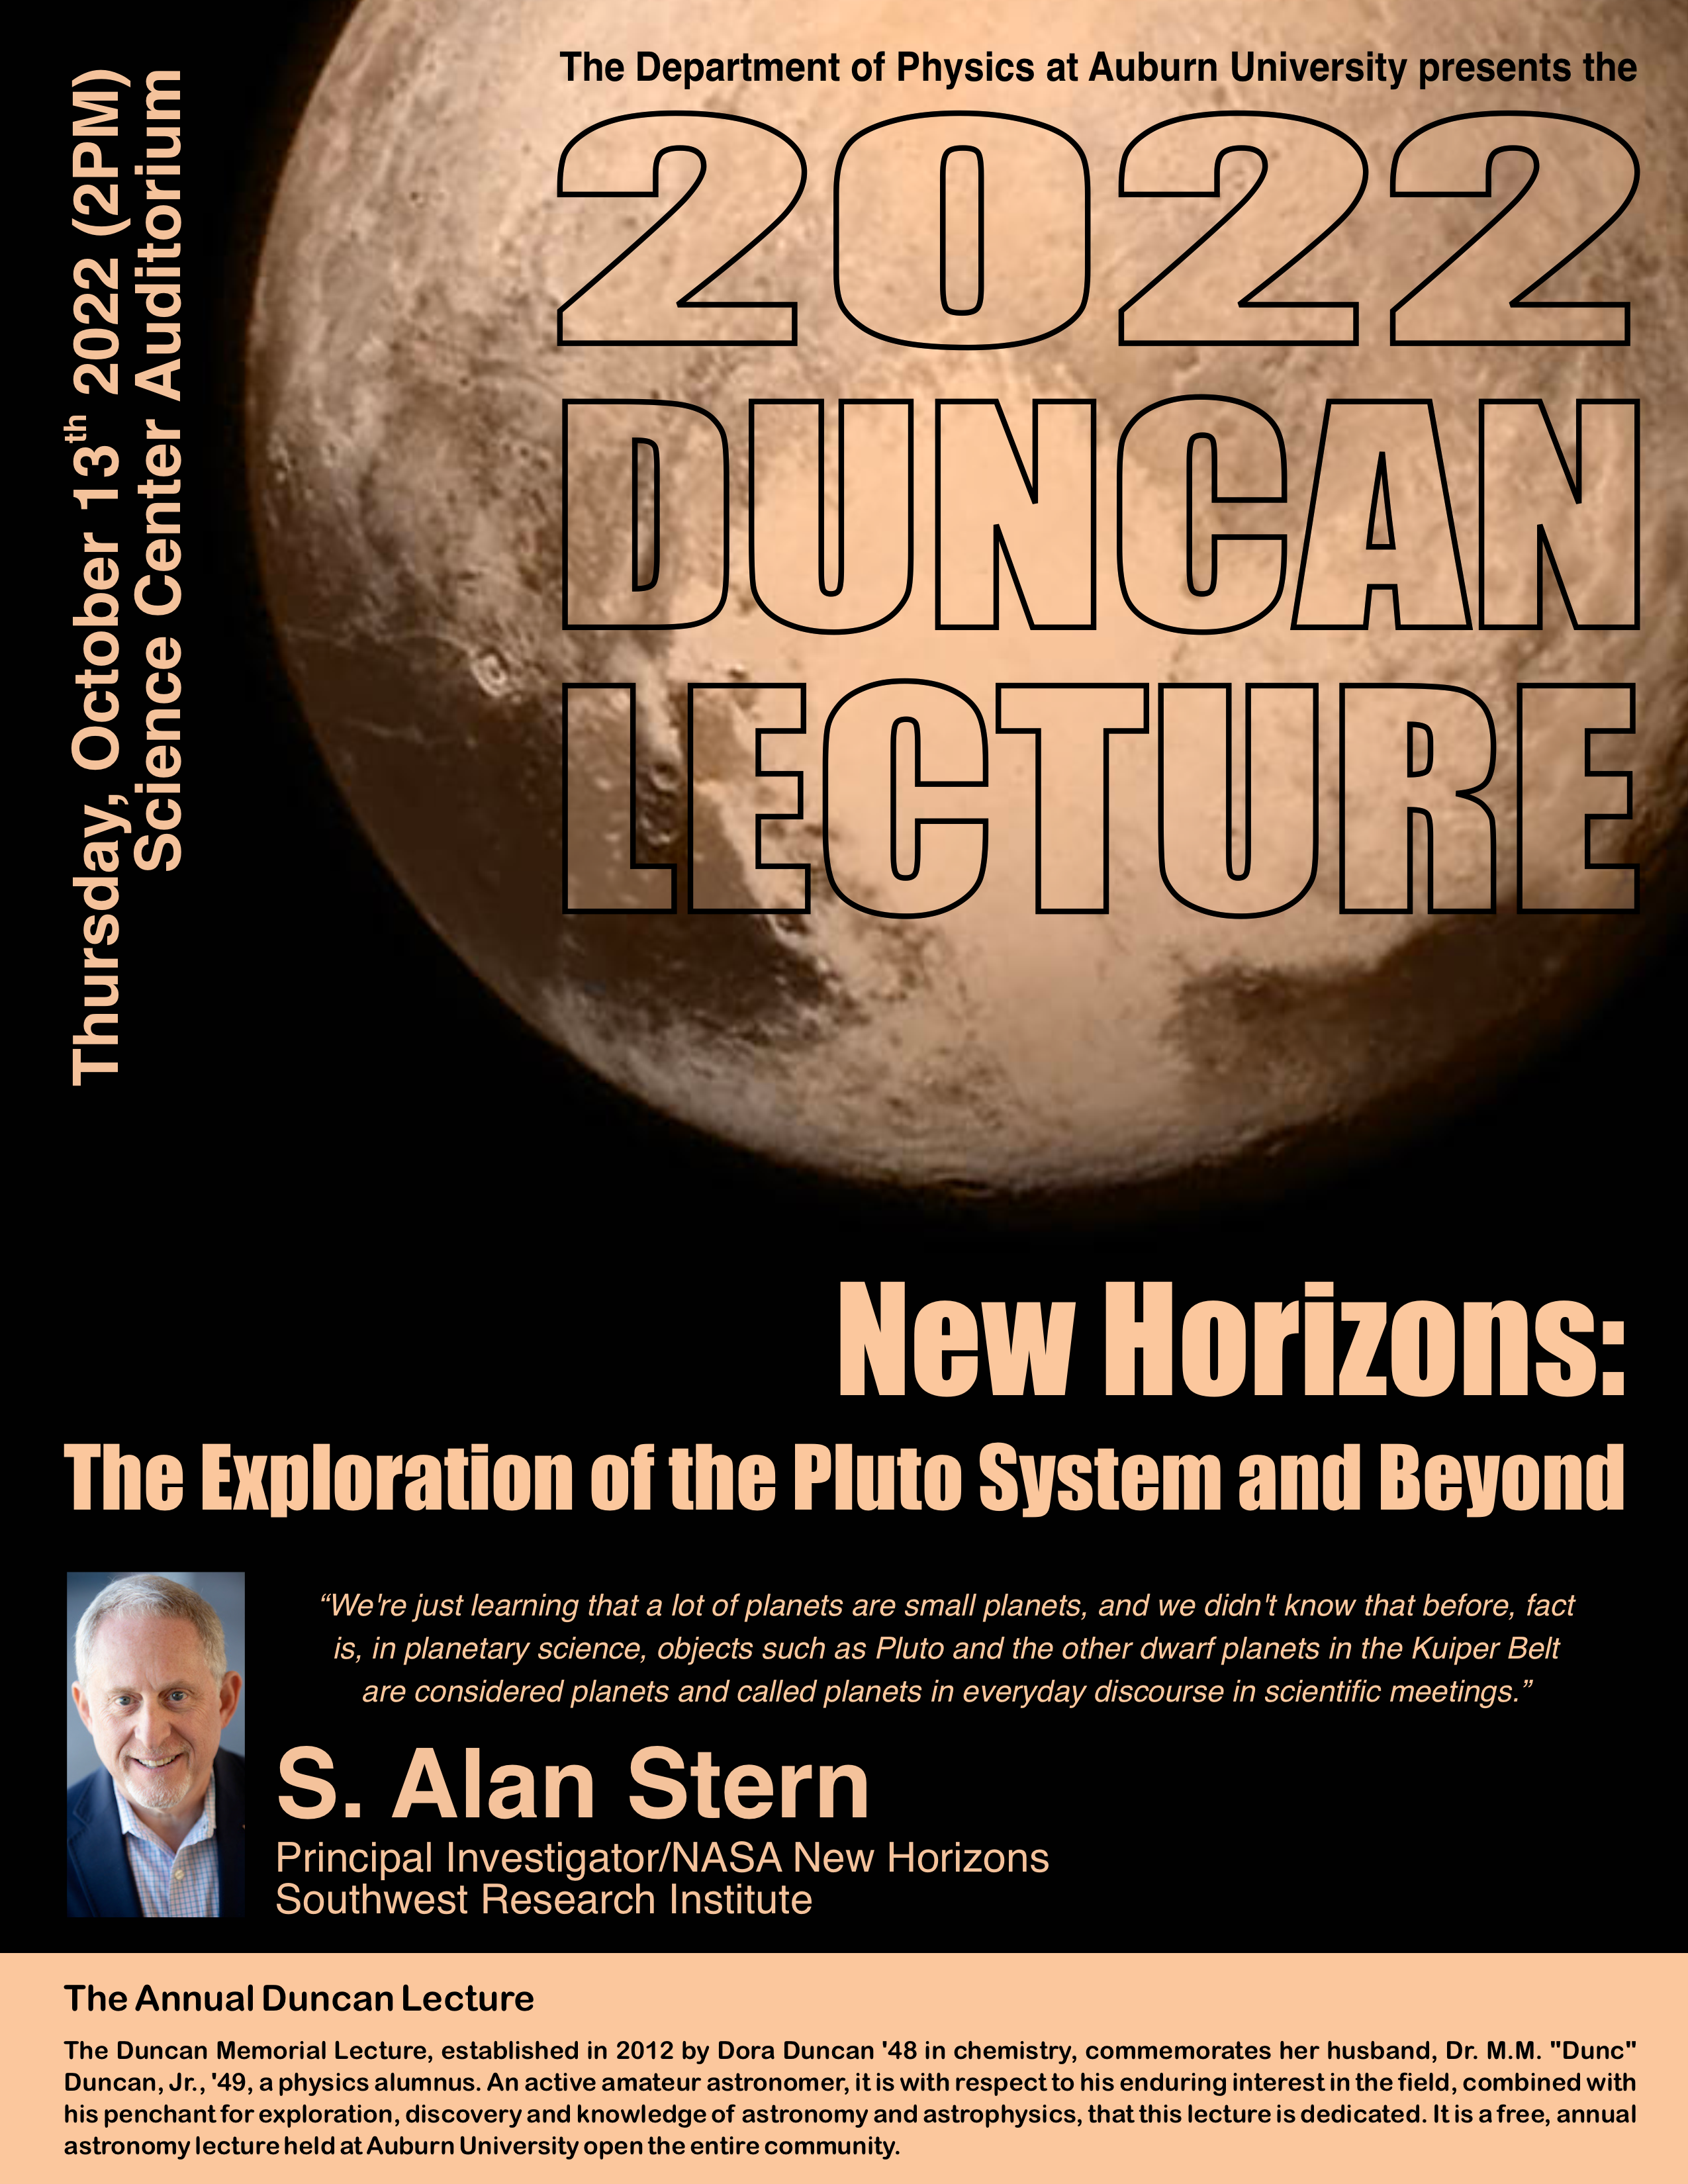 Annual Duncan Lecture